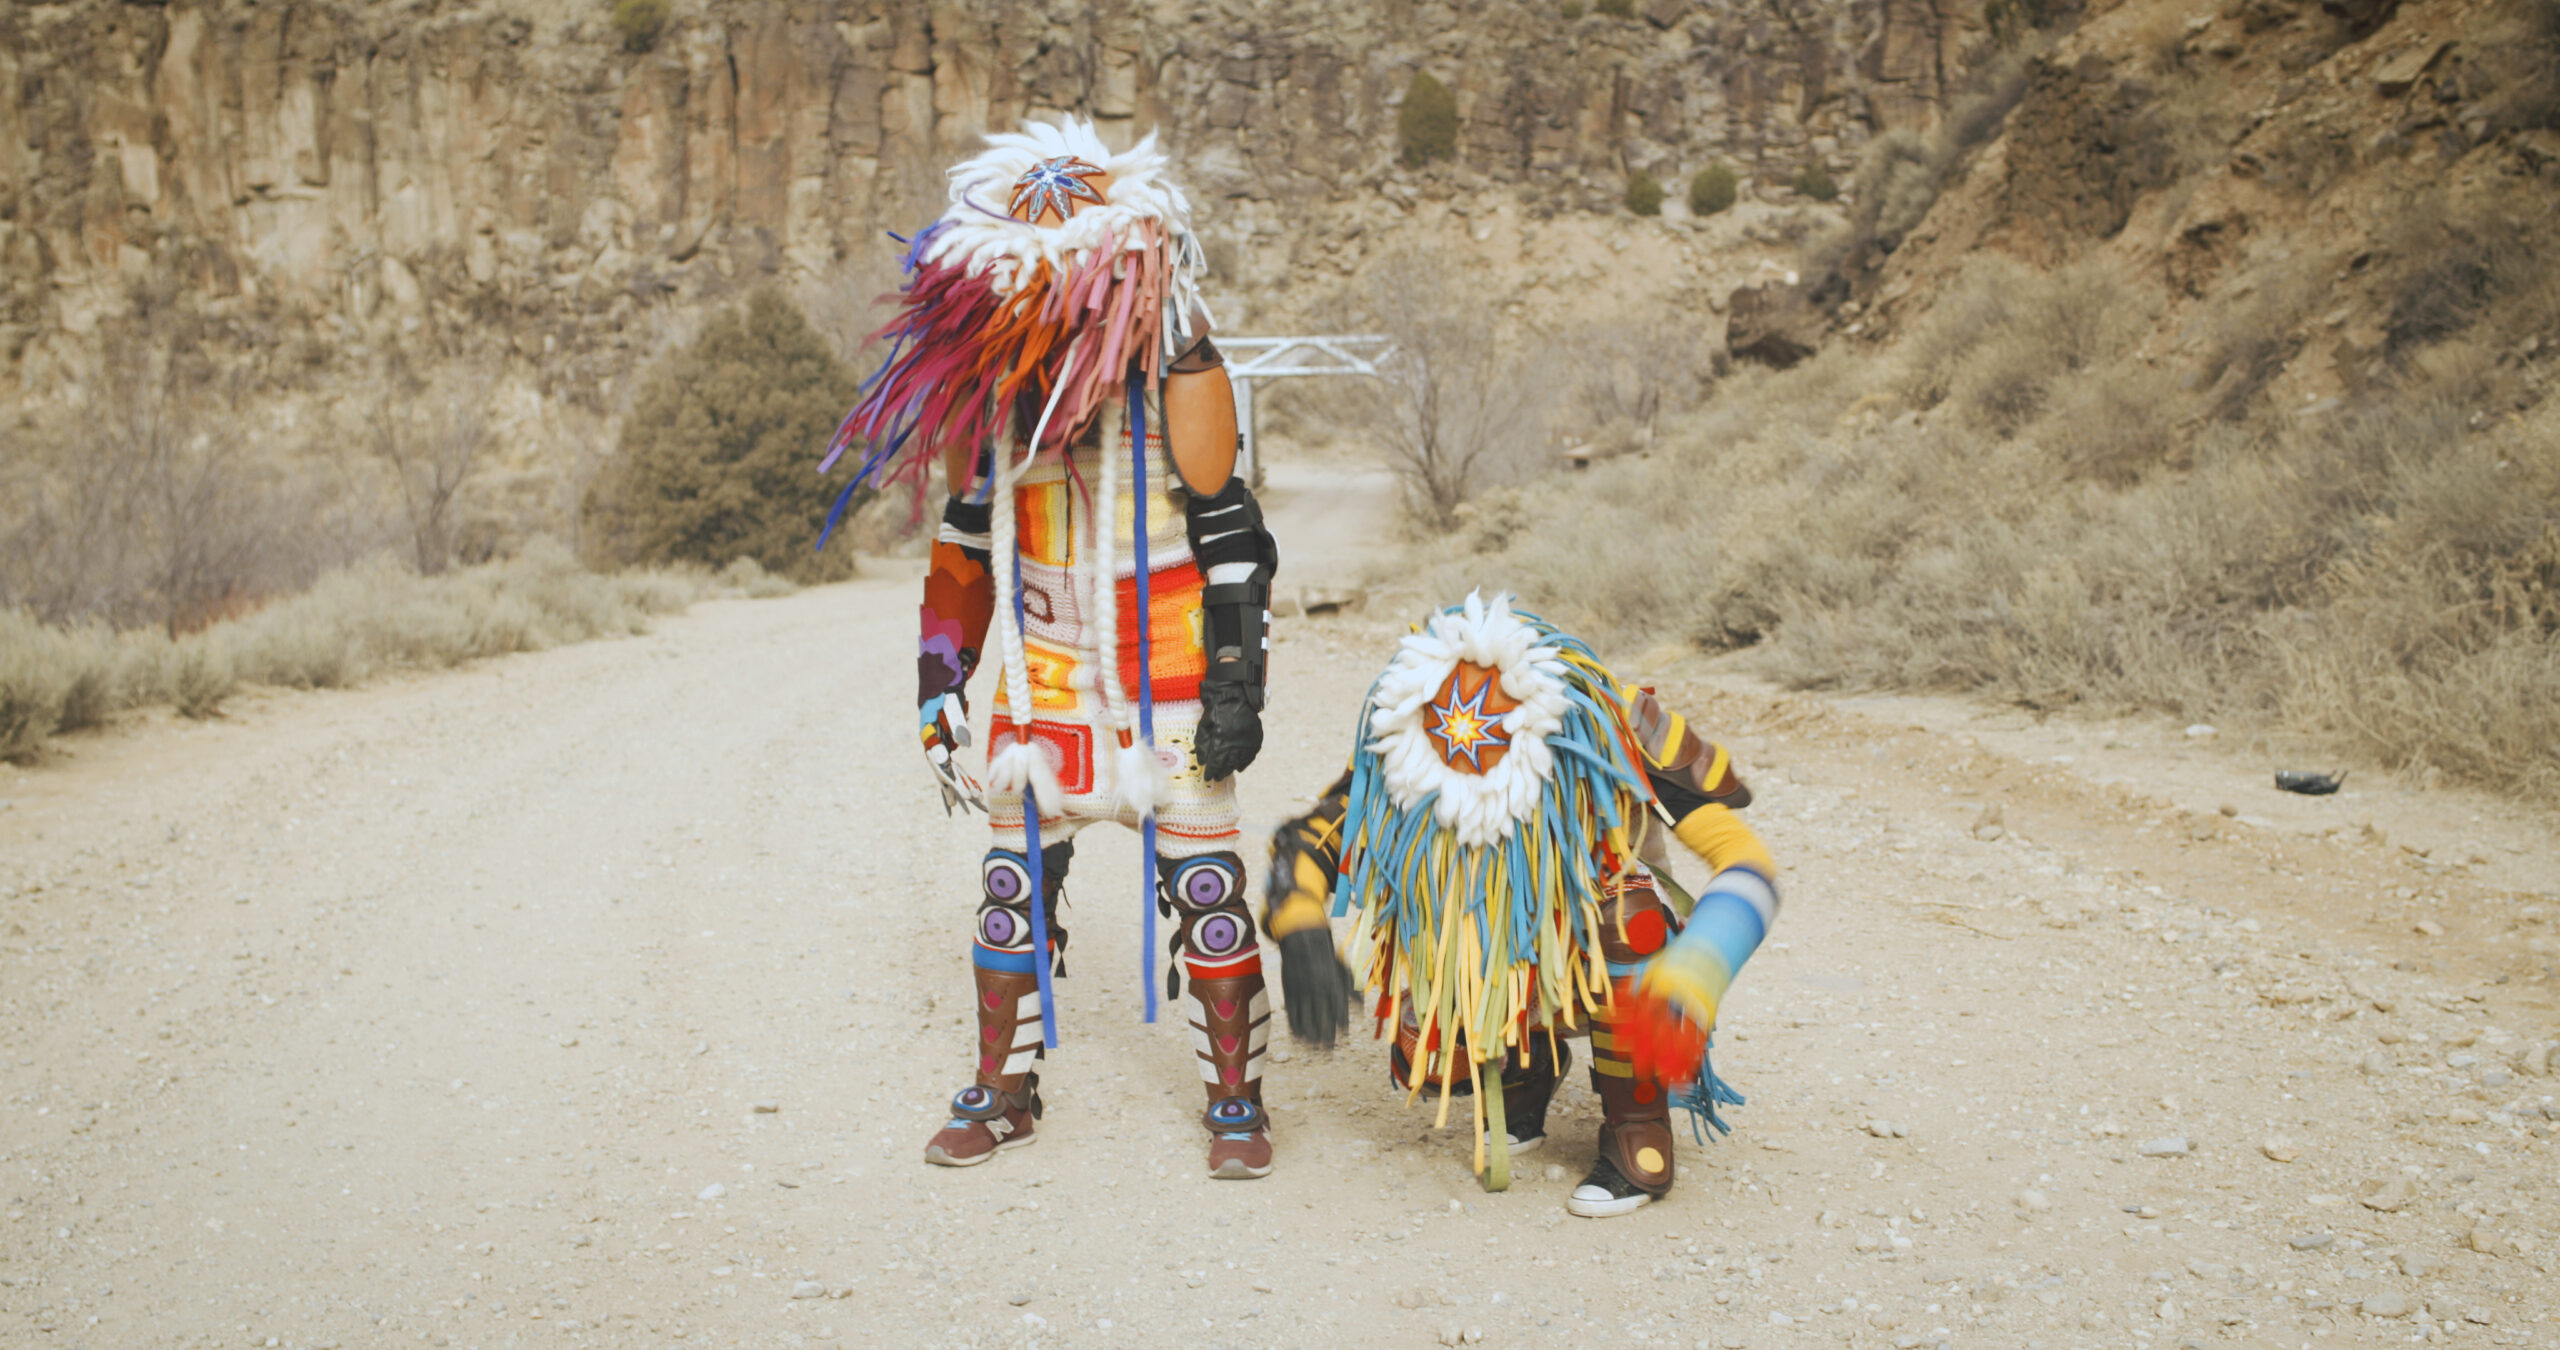 Two people are beside each other in a desert, one standing and one kneeling. They are looking down at the ground, and are wearing colourful Indigenous clothing and headwear.